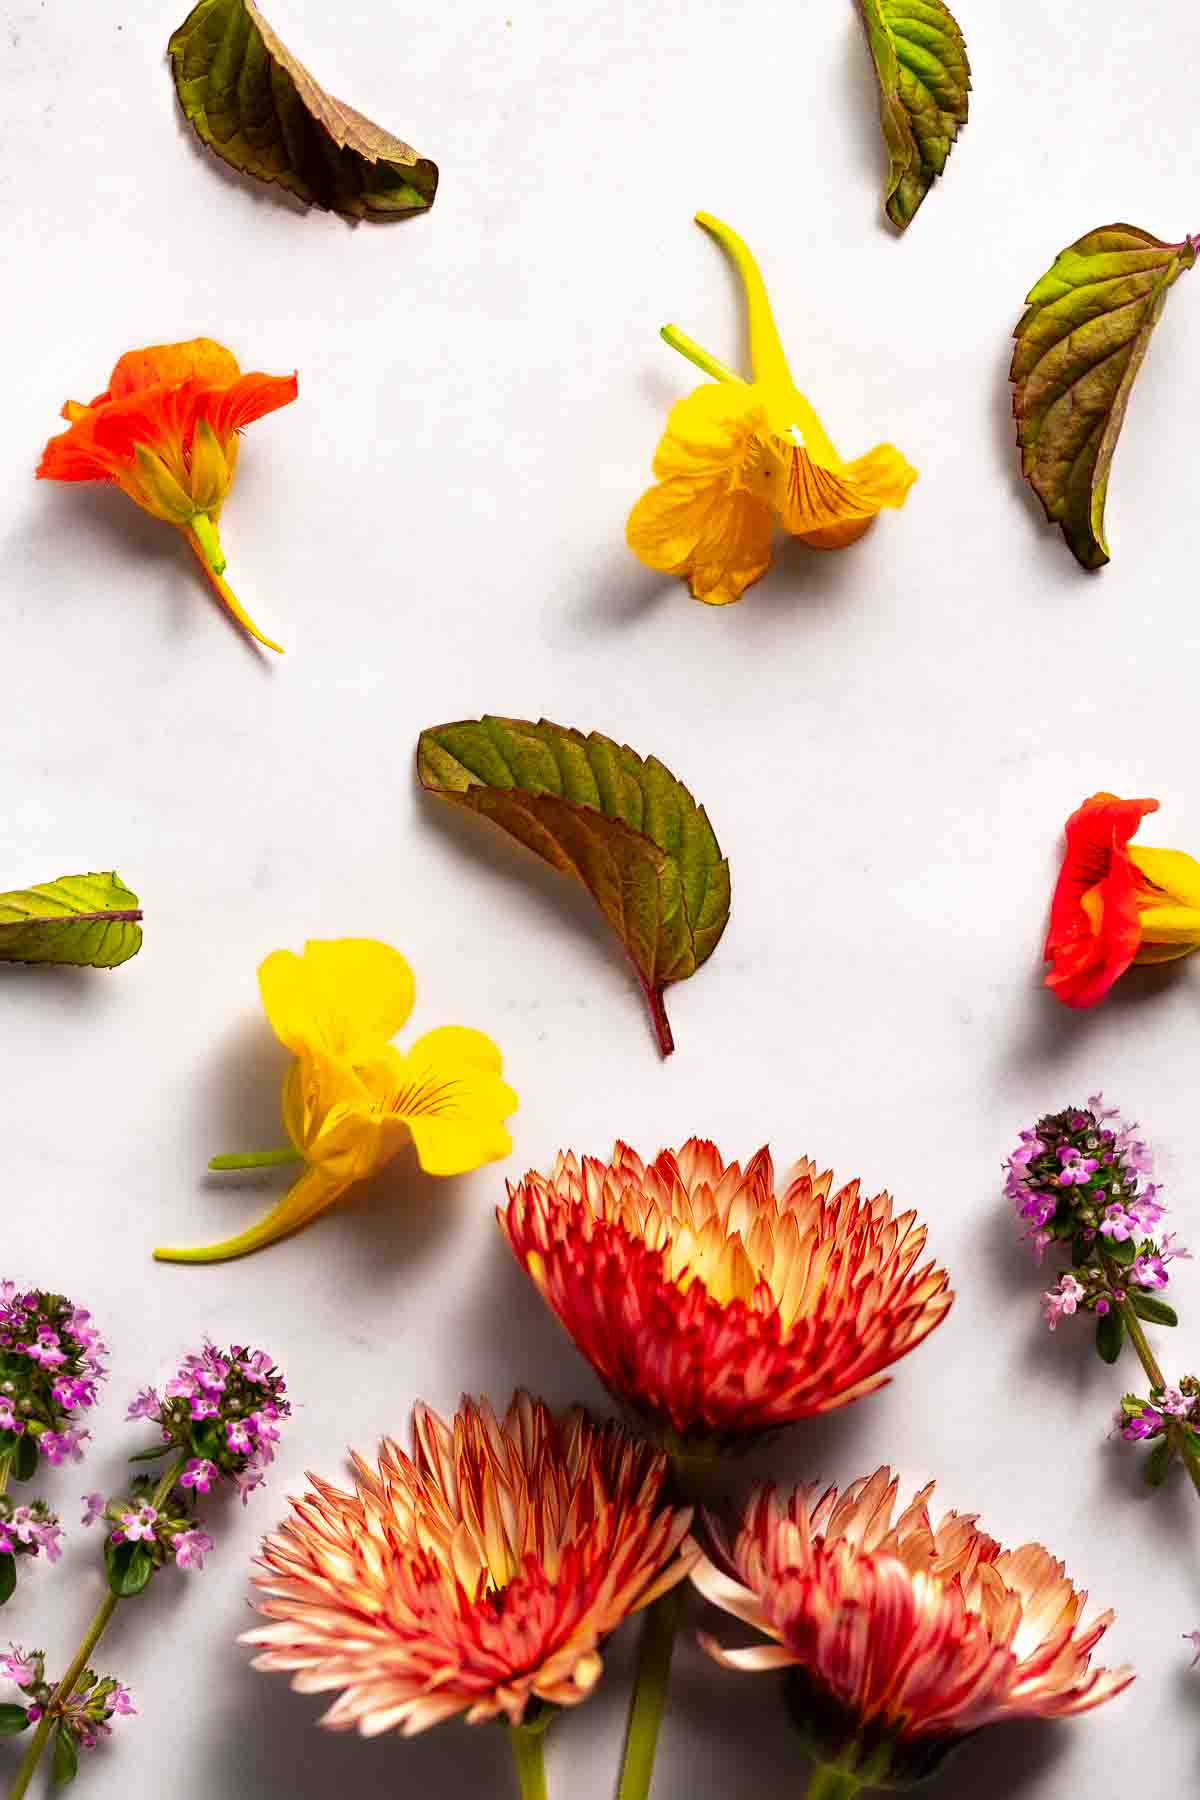 Edible flowers and herbs on a white surface.